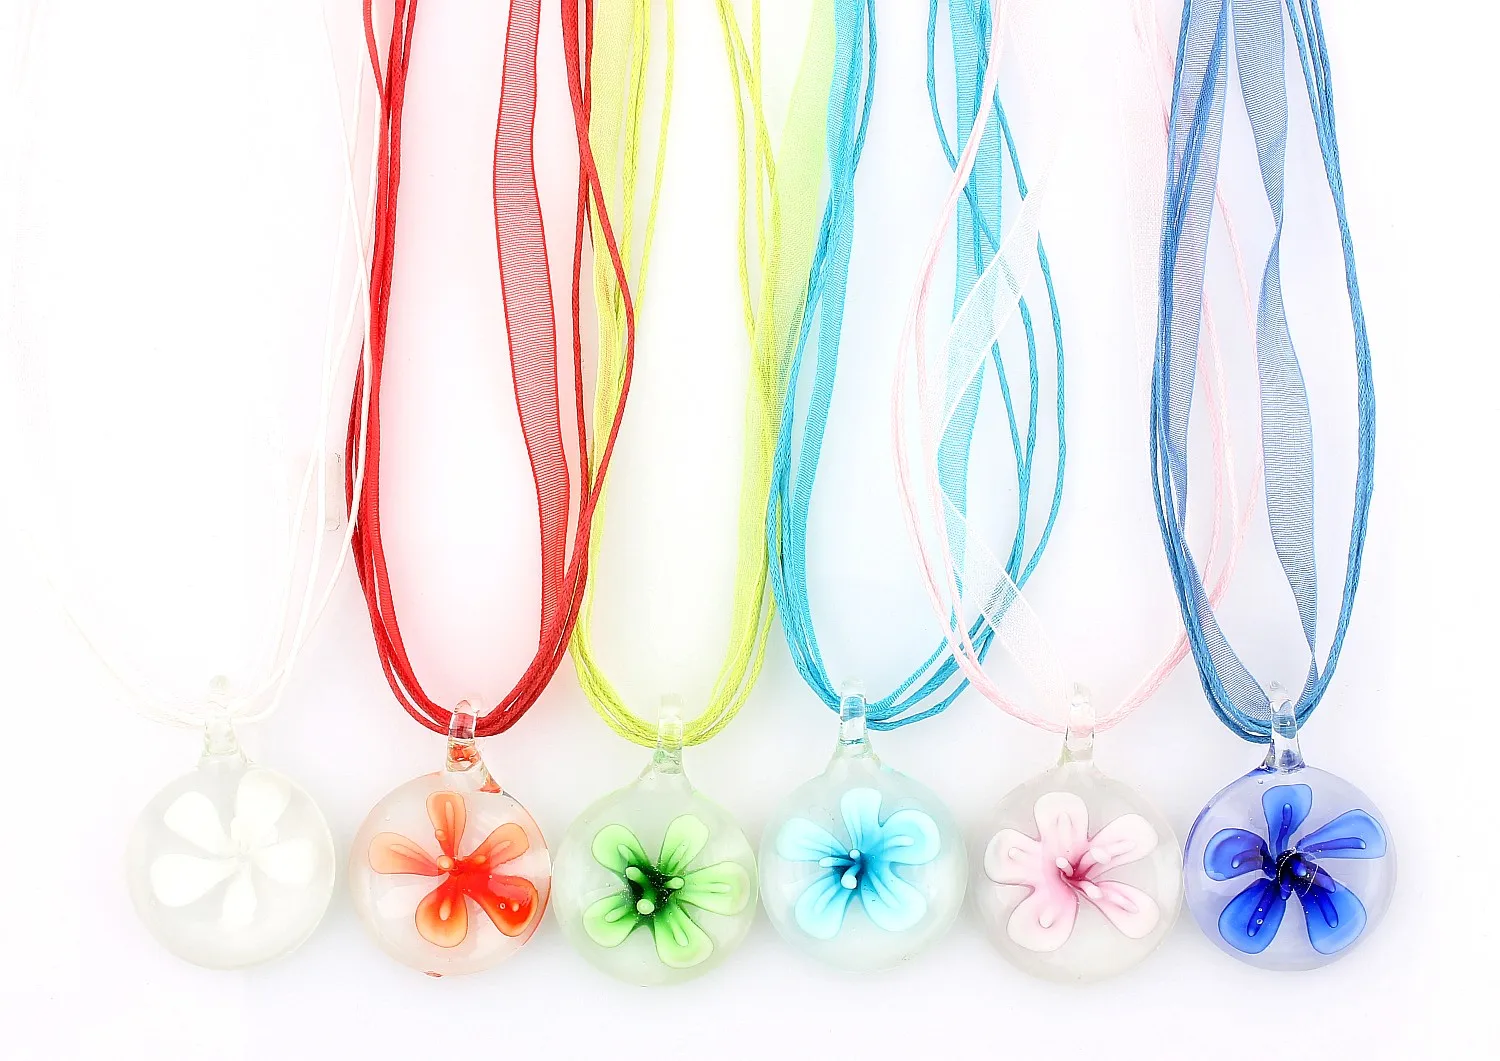 

Hot Sell Wholesale Lots 6pcs Murano Lampwork Glass Round Beauty Flower Charm Pendant Necklaces For Women's Jewelry